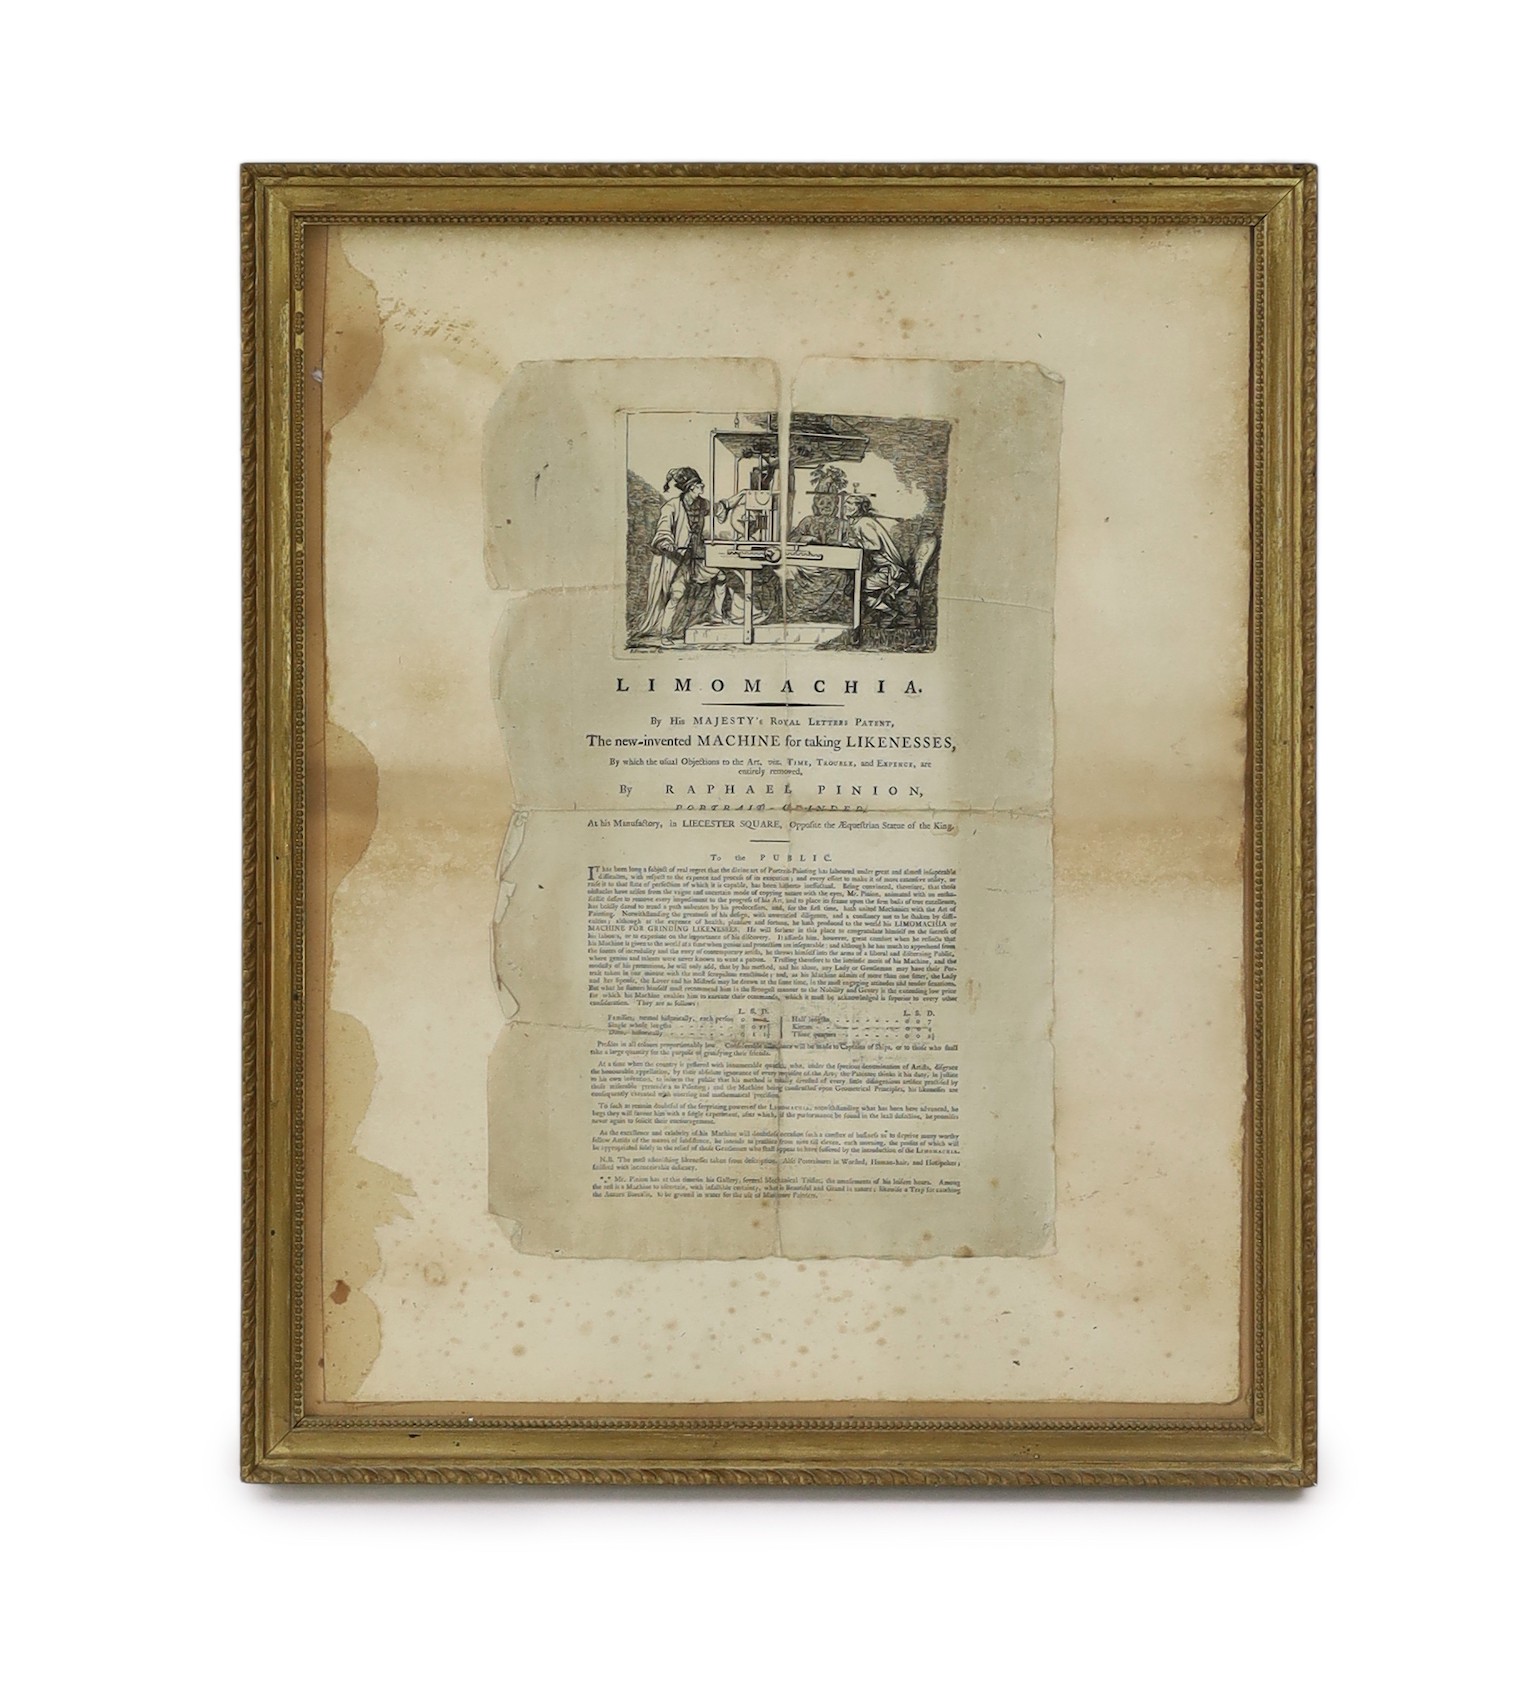 An early printed sheet 'Limomachia, the new invented machine for taking likenesses', by Raphael Pinion, 40 x 26cm                                                                                                           